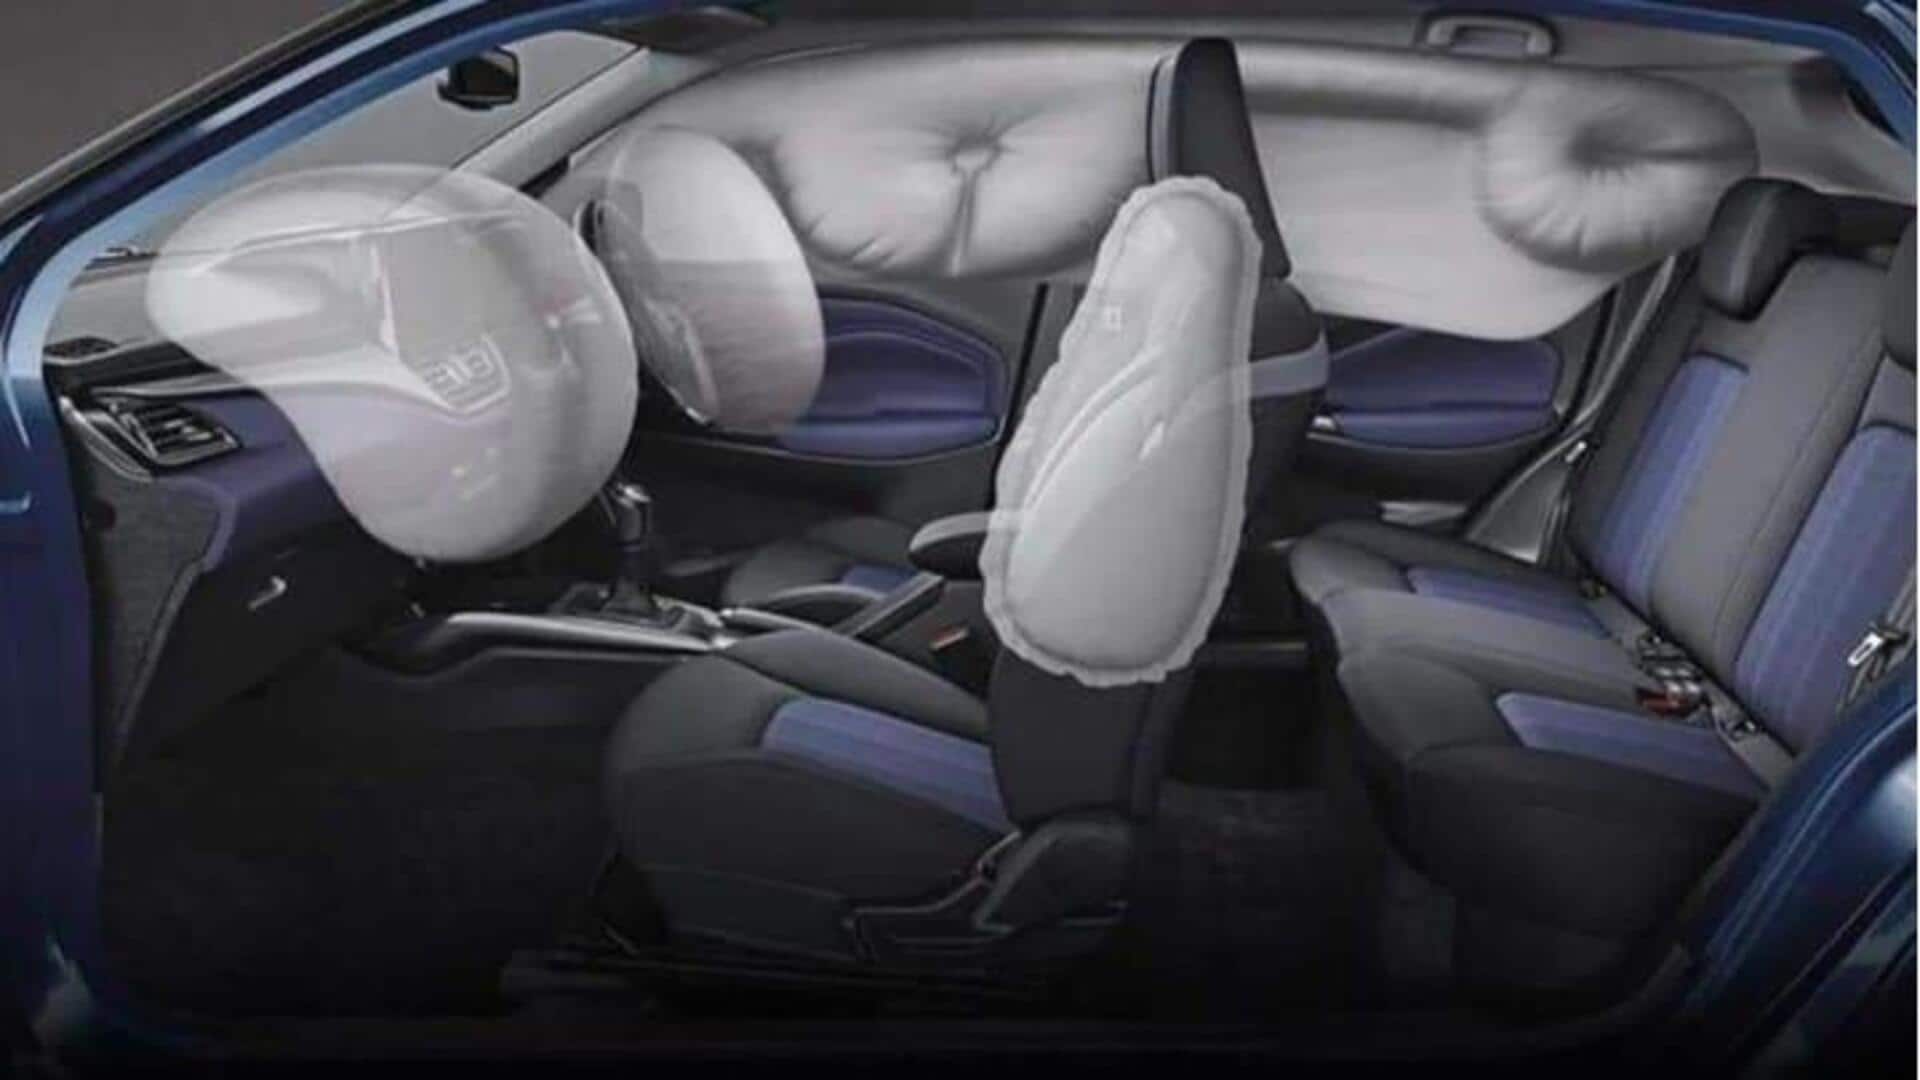 Bharat NCAP demands 6 airbags for 5-star safety rating: Gadkari